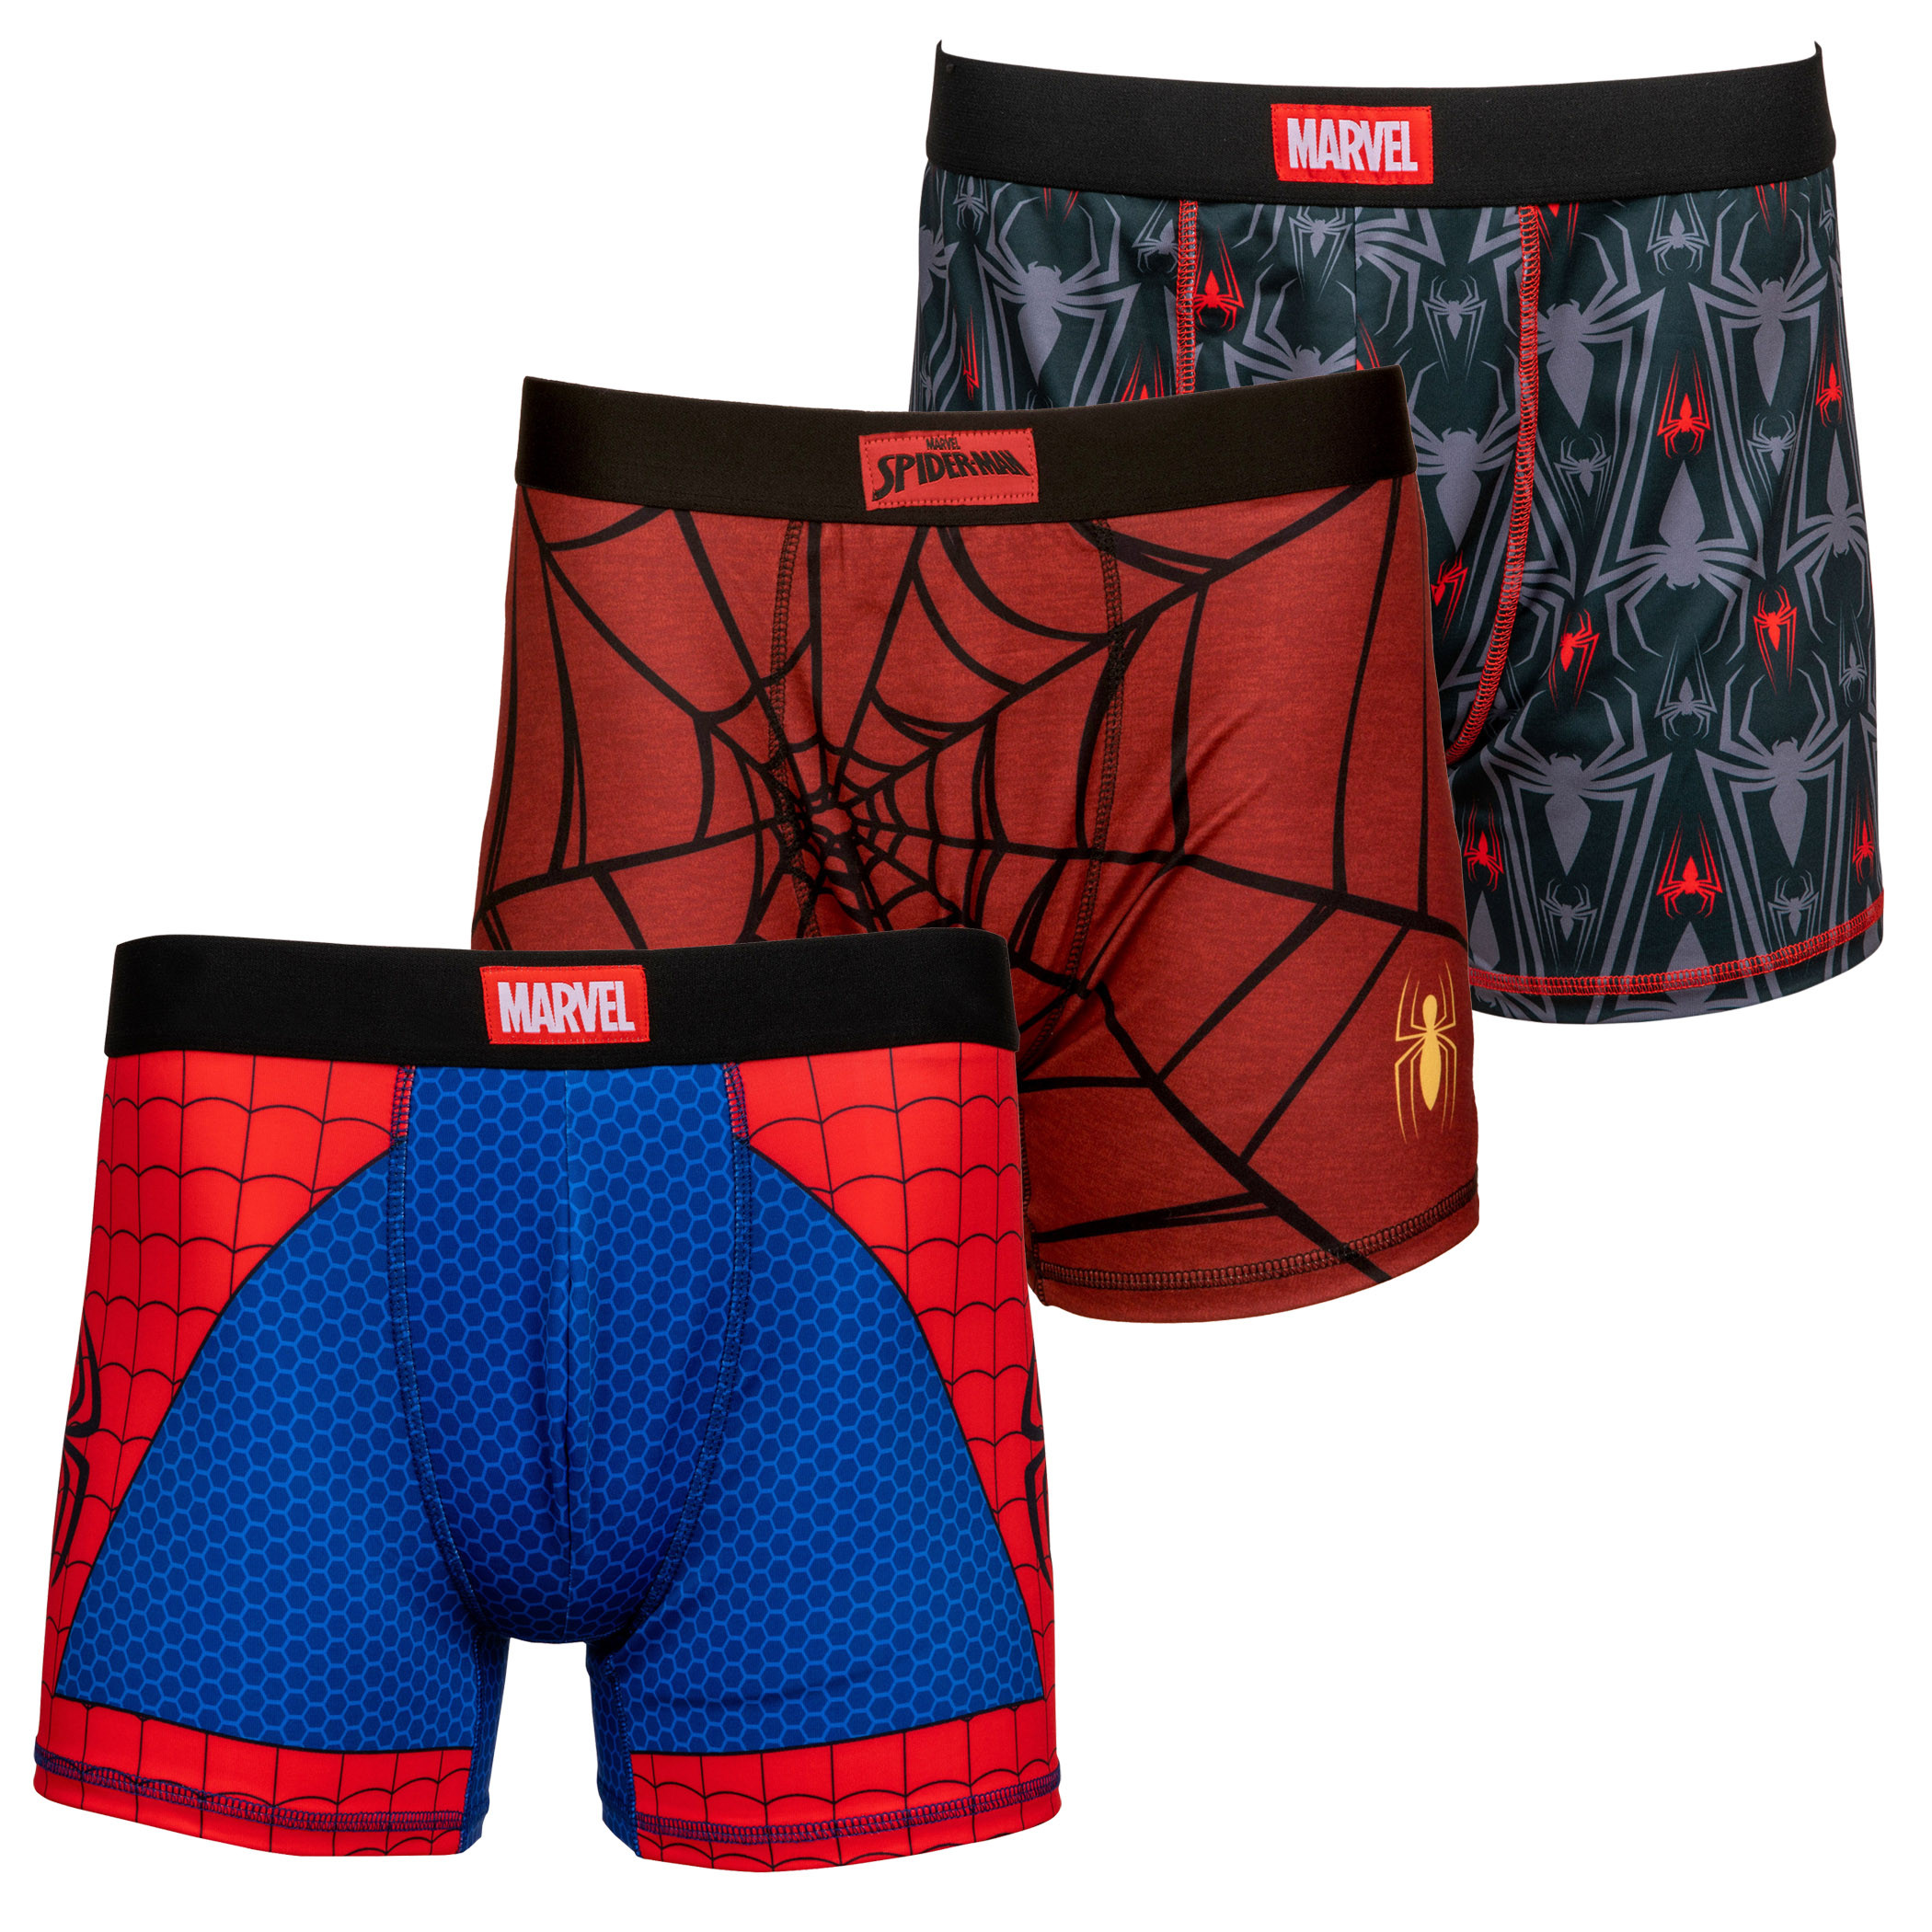 https://mmv2api.s3.us-east-2.amazonaws.com/products/images/spiderman%203%20pack%20boxers.jpg